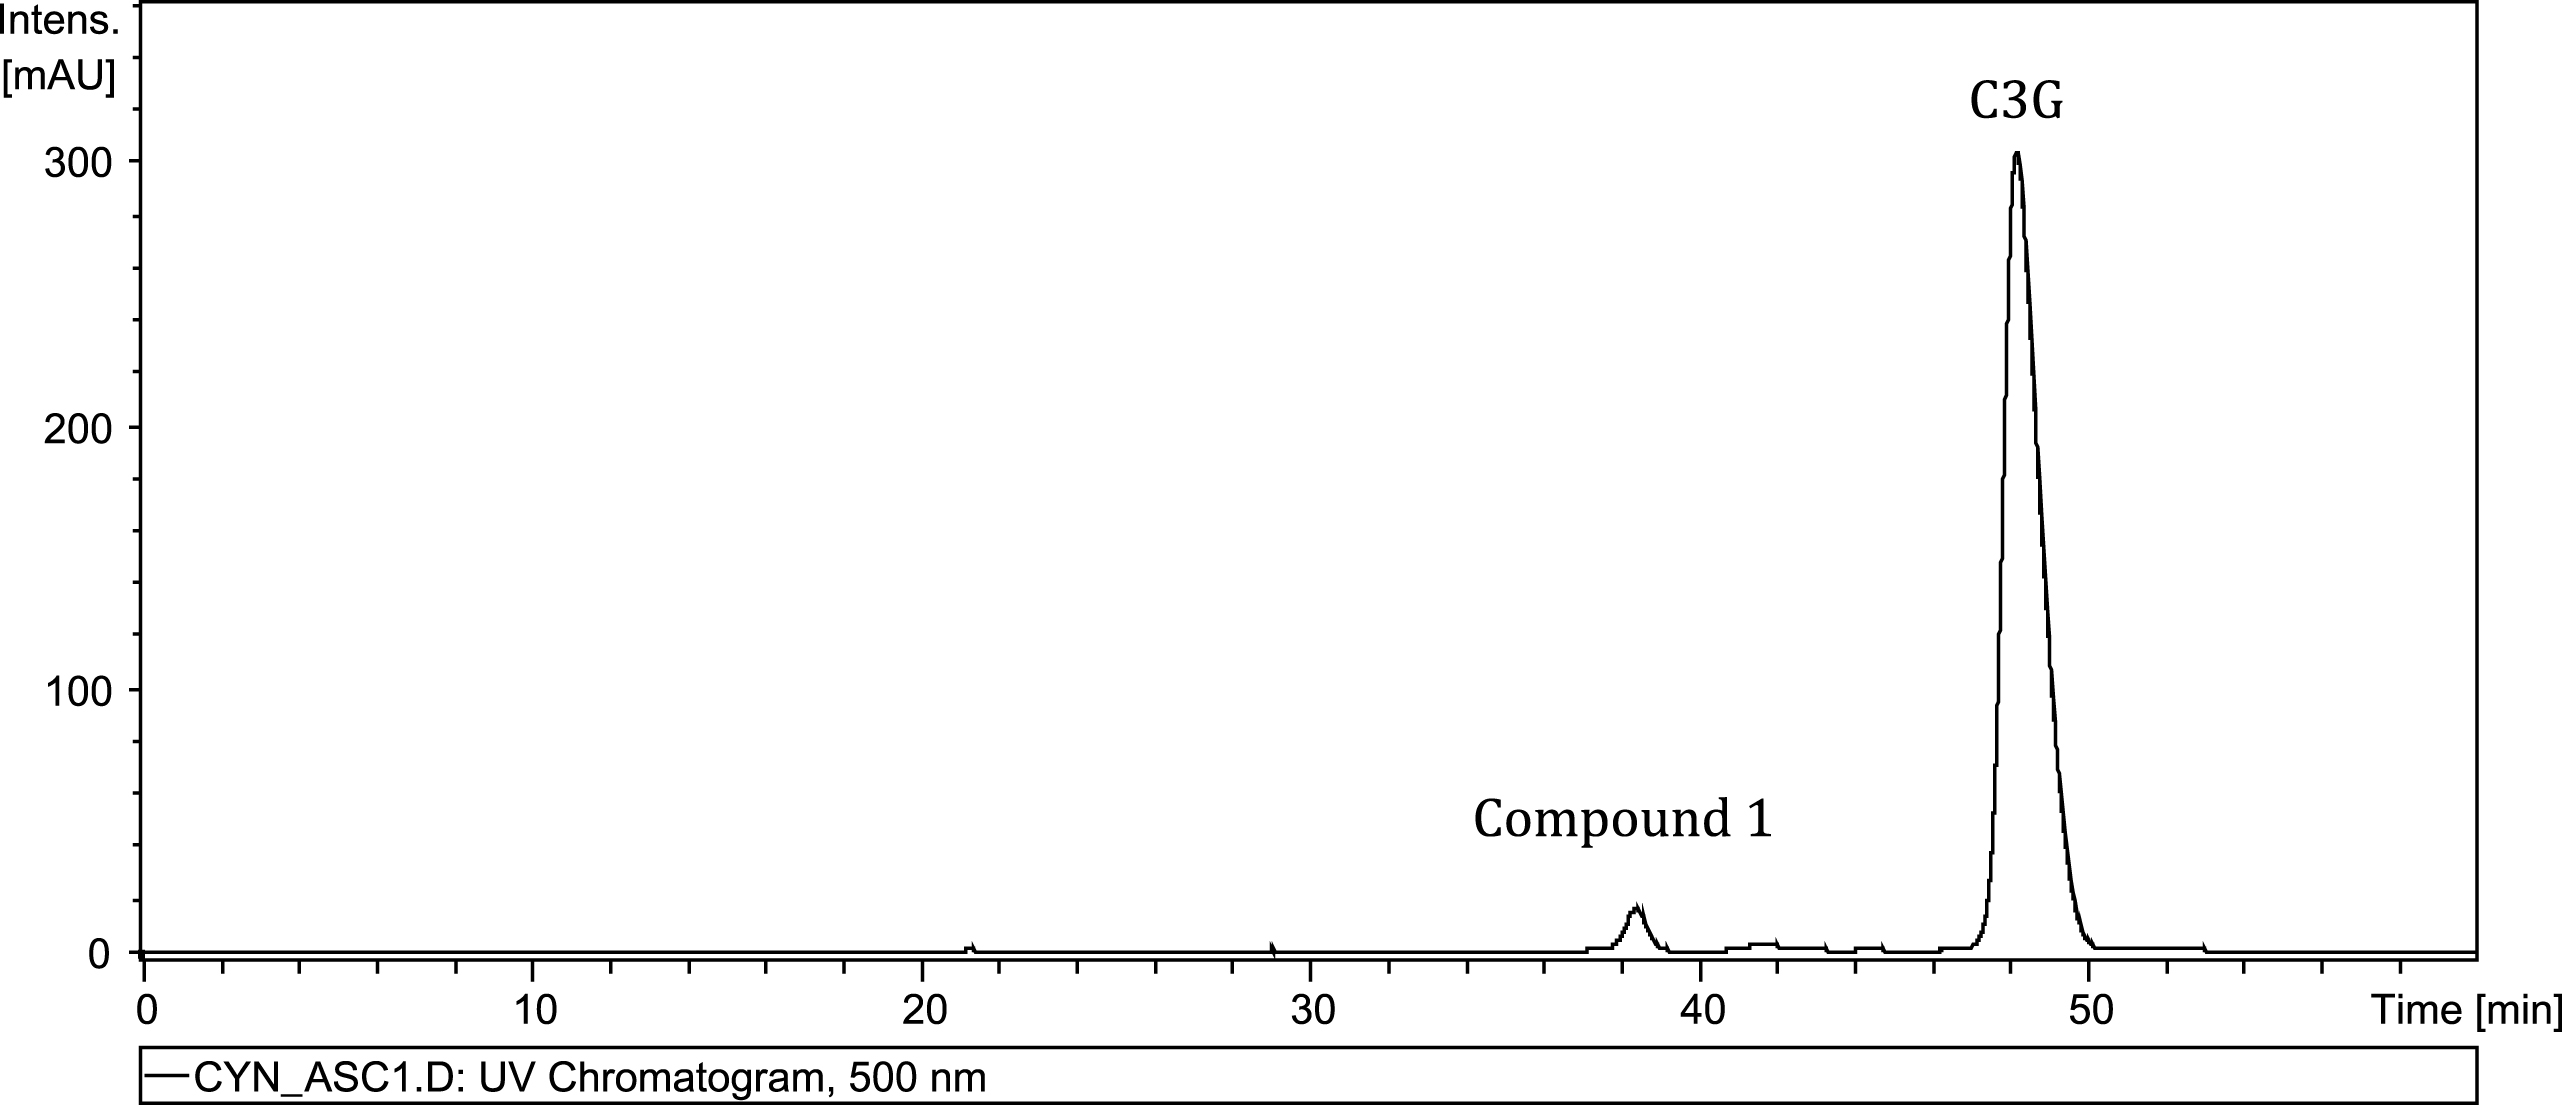 HPLC chromatogram (500 nm) of Compound 1 and C3G at 30 hours in the base model system.